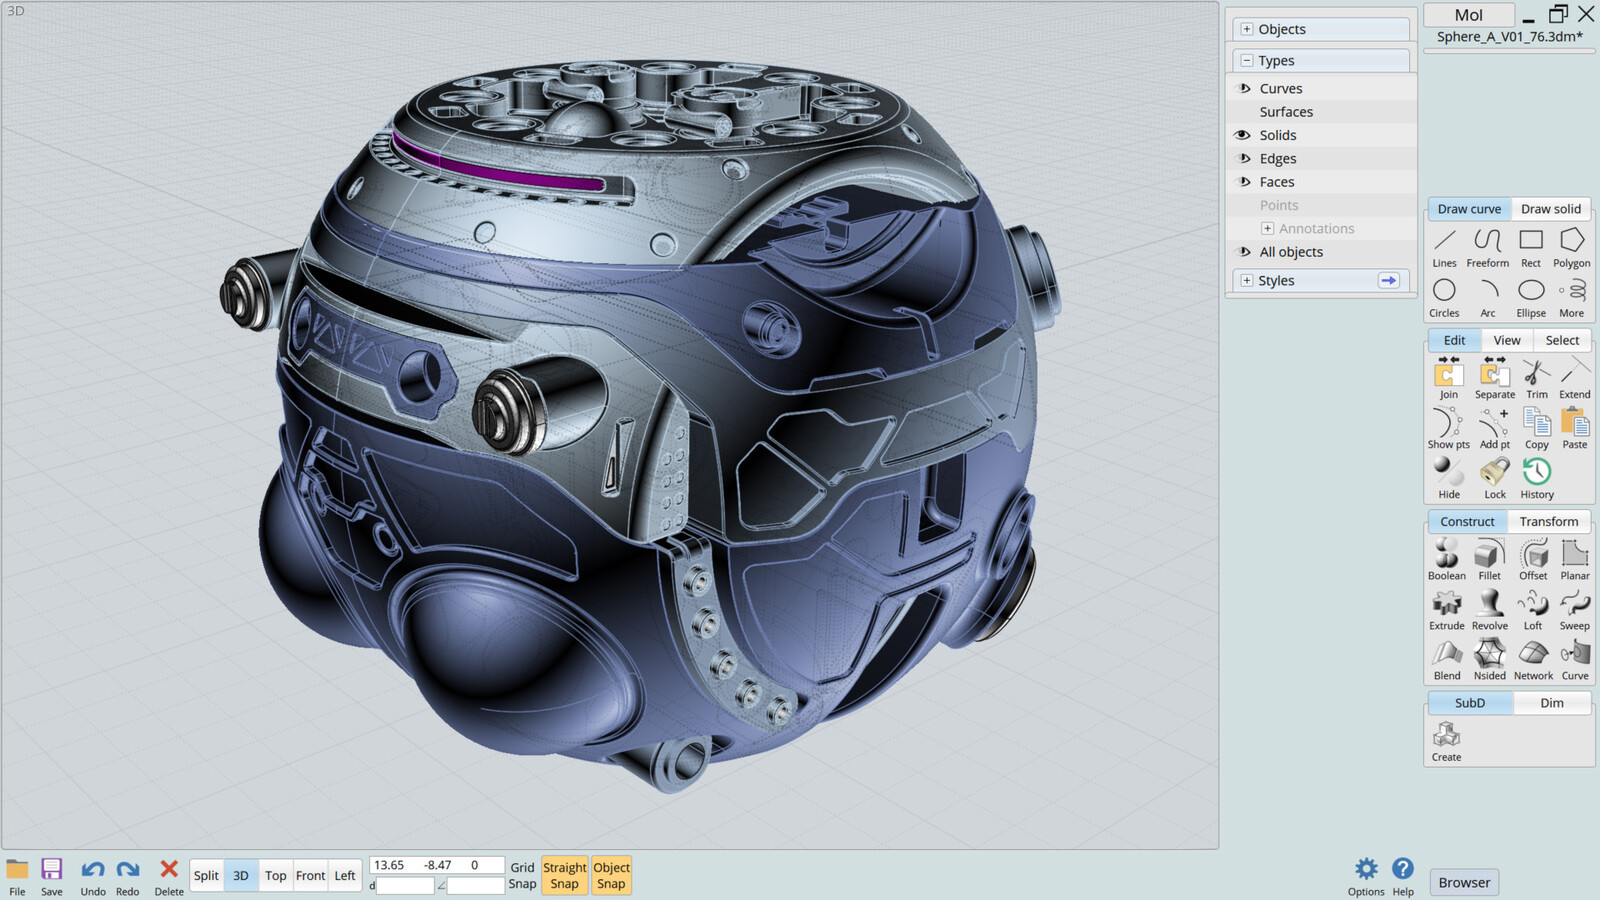 Screen capture of Sphere model from Moi.